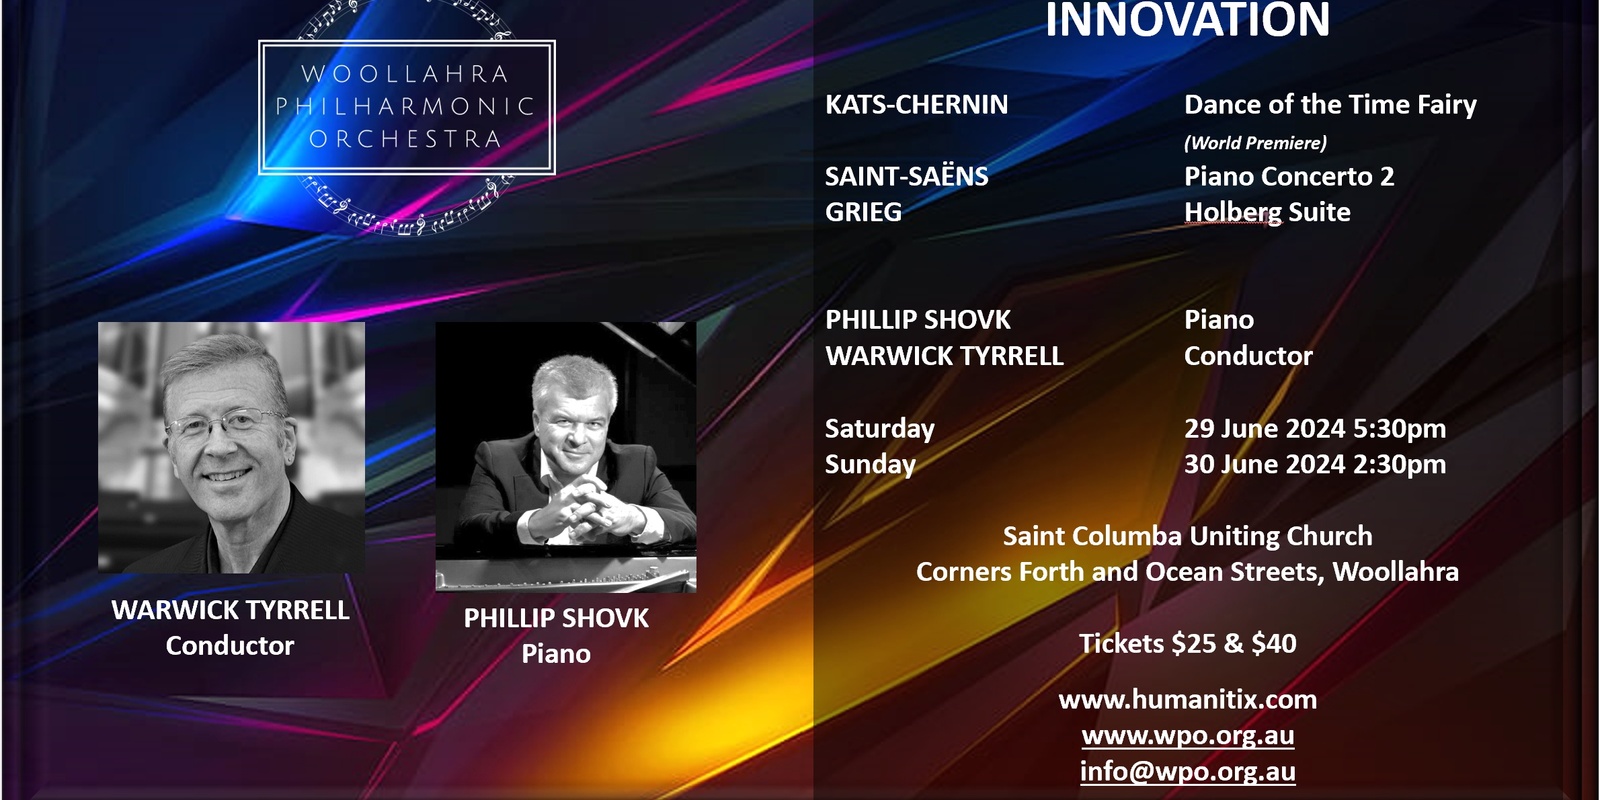 Banner image for Innovation - Woollahra Philharmonic Orchestra